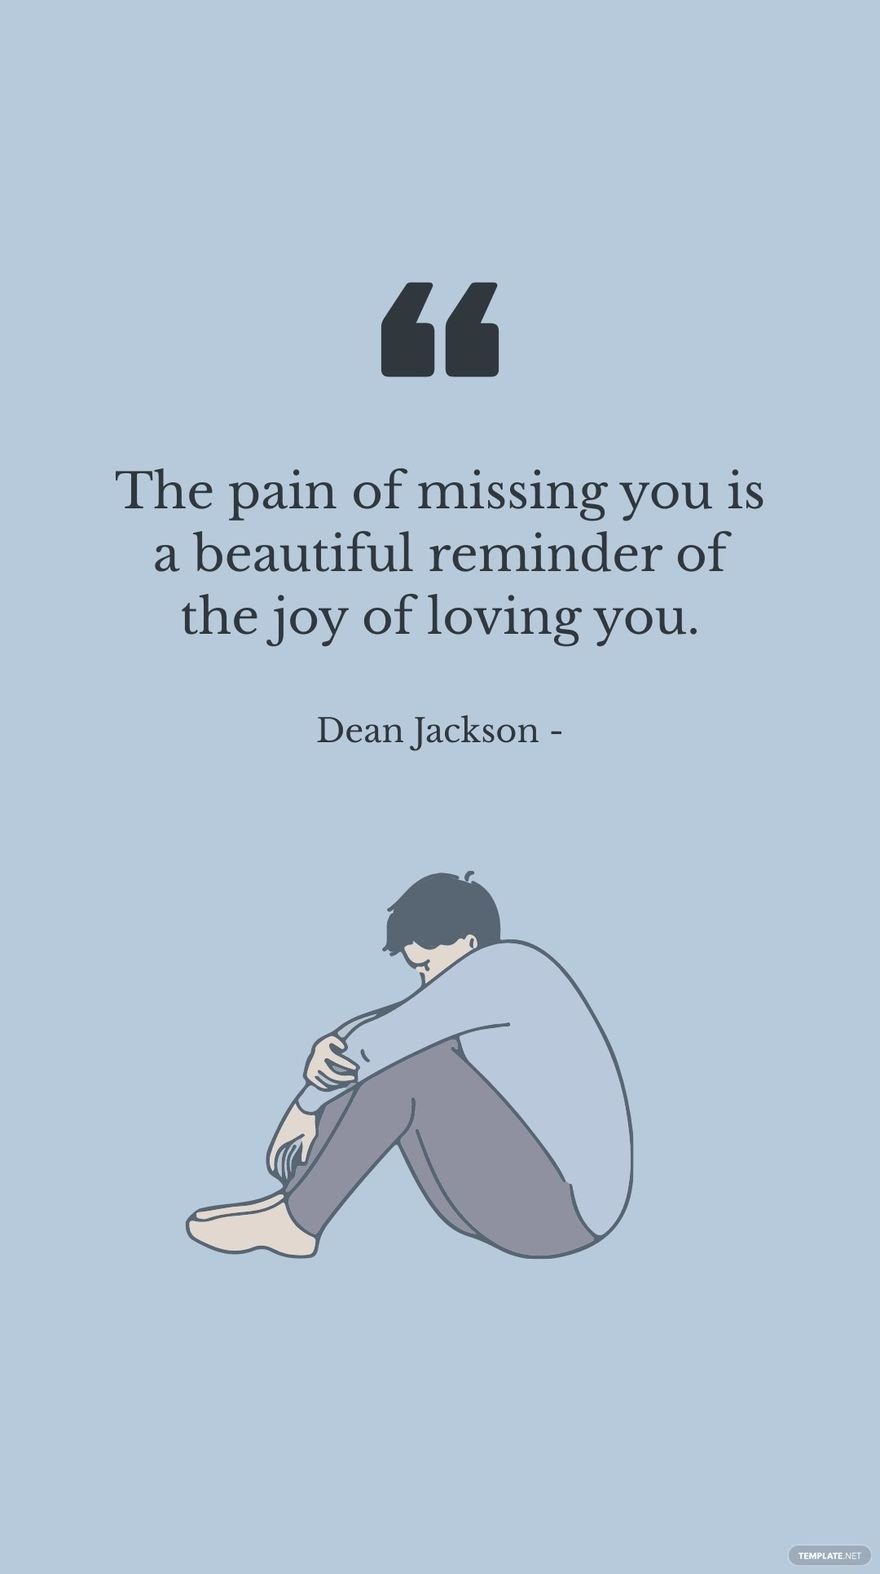 Free Dean Jackson - The pain of missing you is a beautiful reminder of the joy of loving you. in JPG